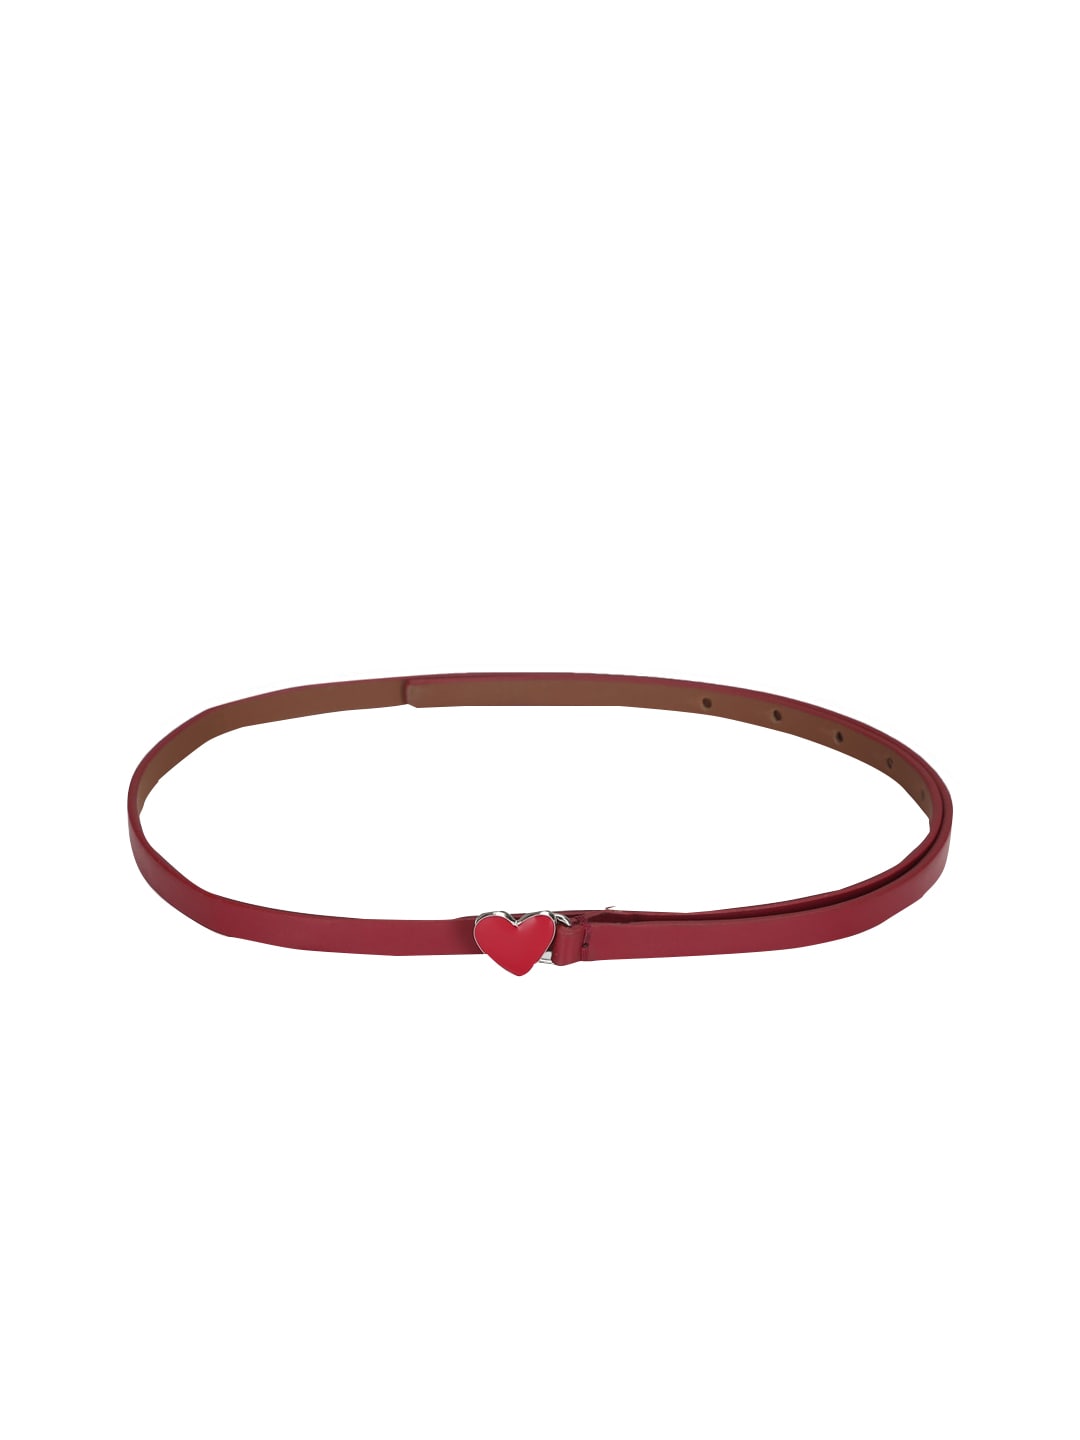 FOREVER 21 Women Maroon Belts Price in India